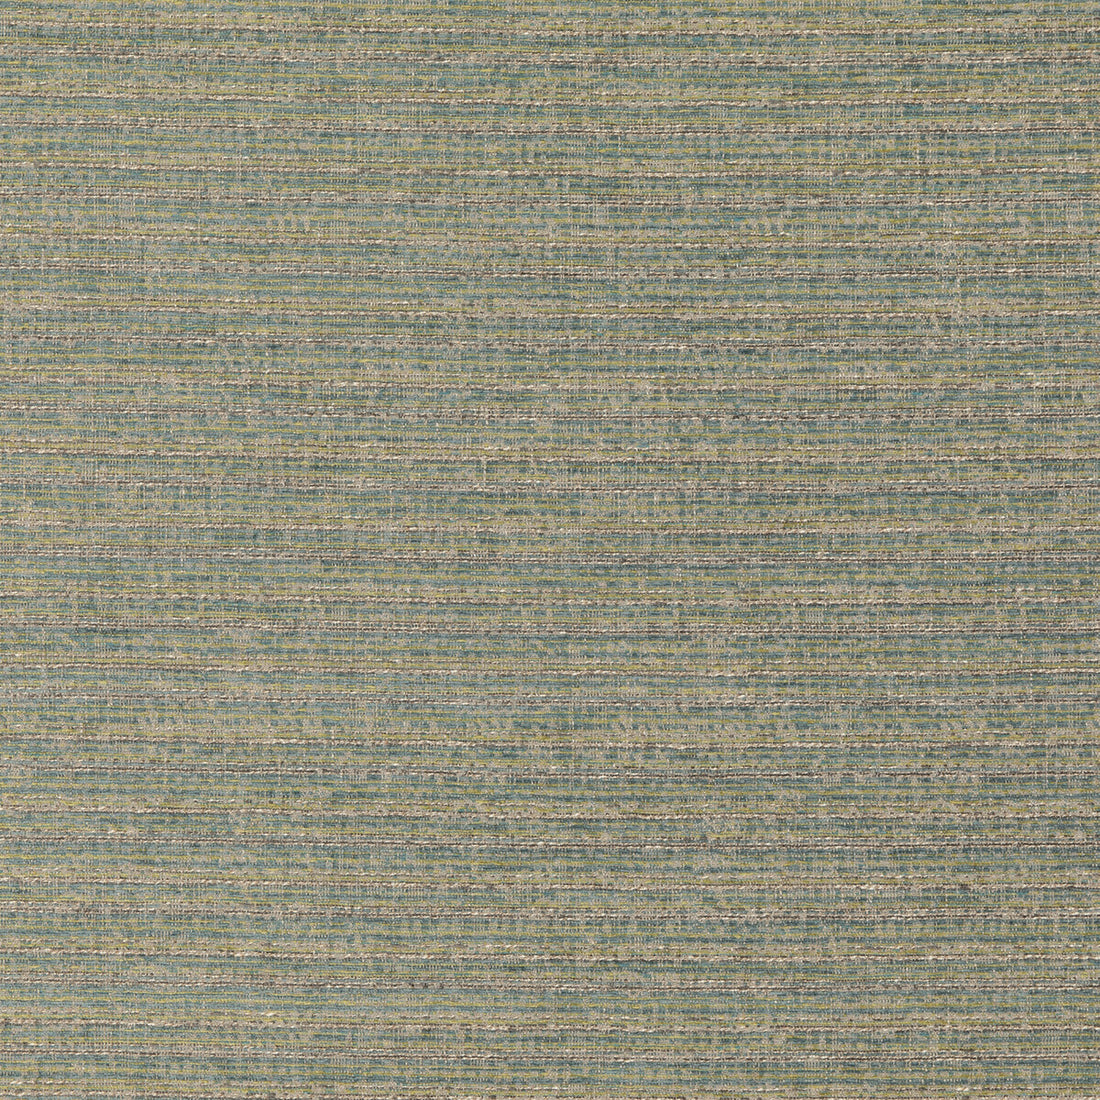 Wychwood fabric in teal/green color - pattern BF10885.615.0 - by G P &amp; J Baker in the Essential Colours II collection